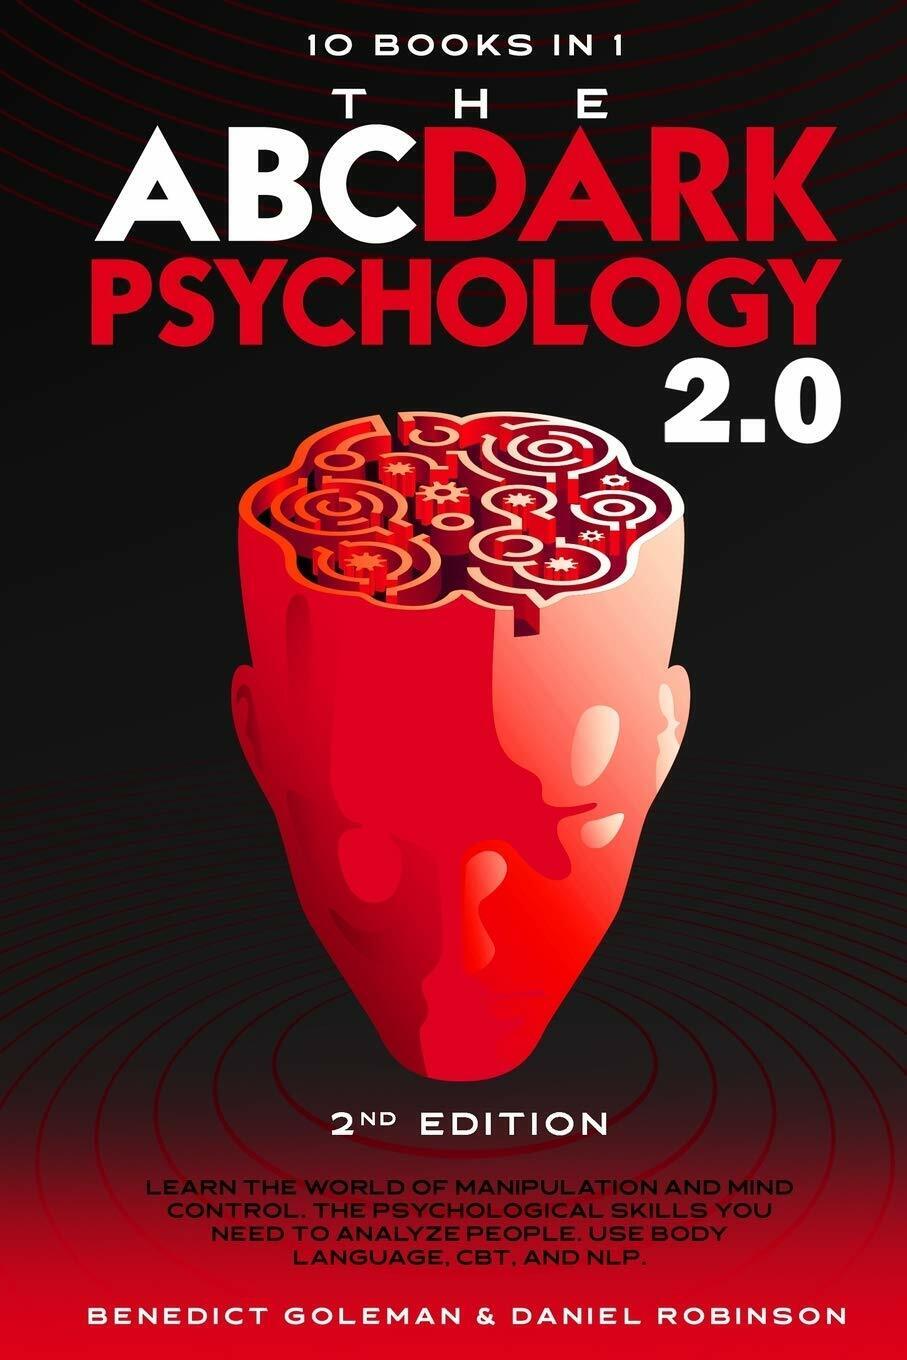 The ABC ... Dark Psychology 2.0 - 10 Books in 1 - 2nd Edition Learn the World of